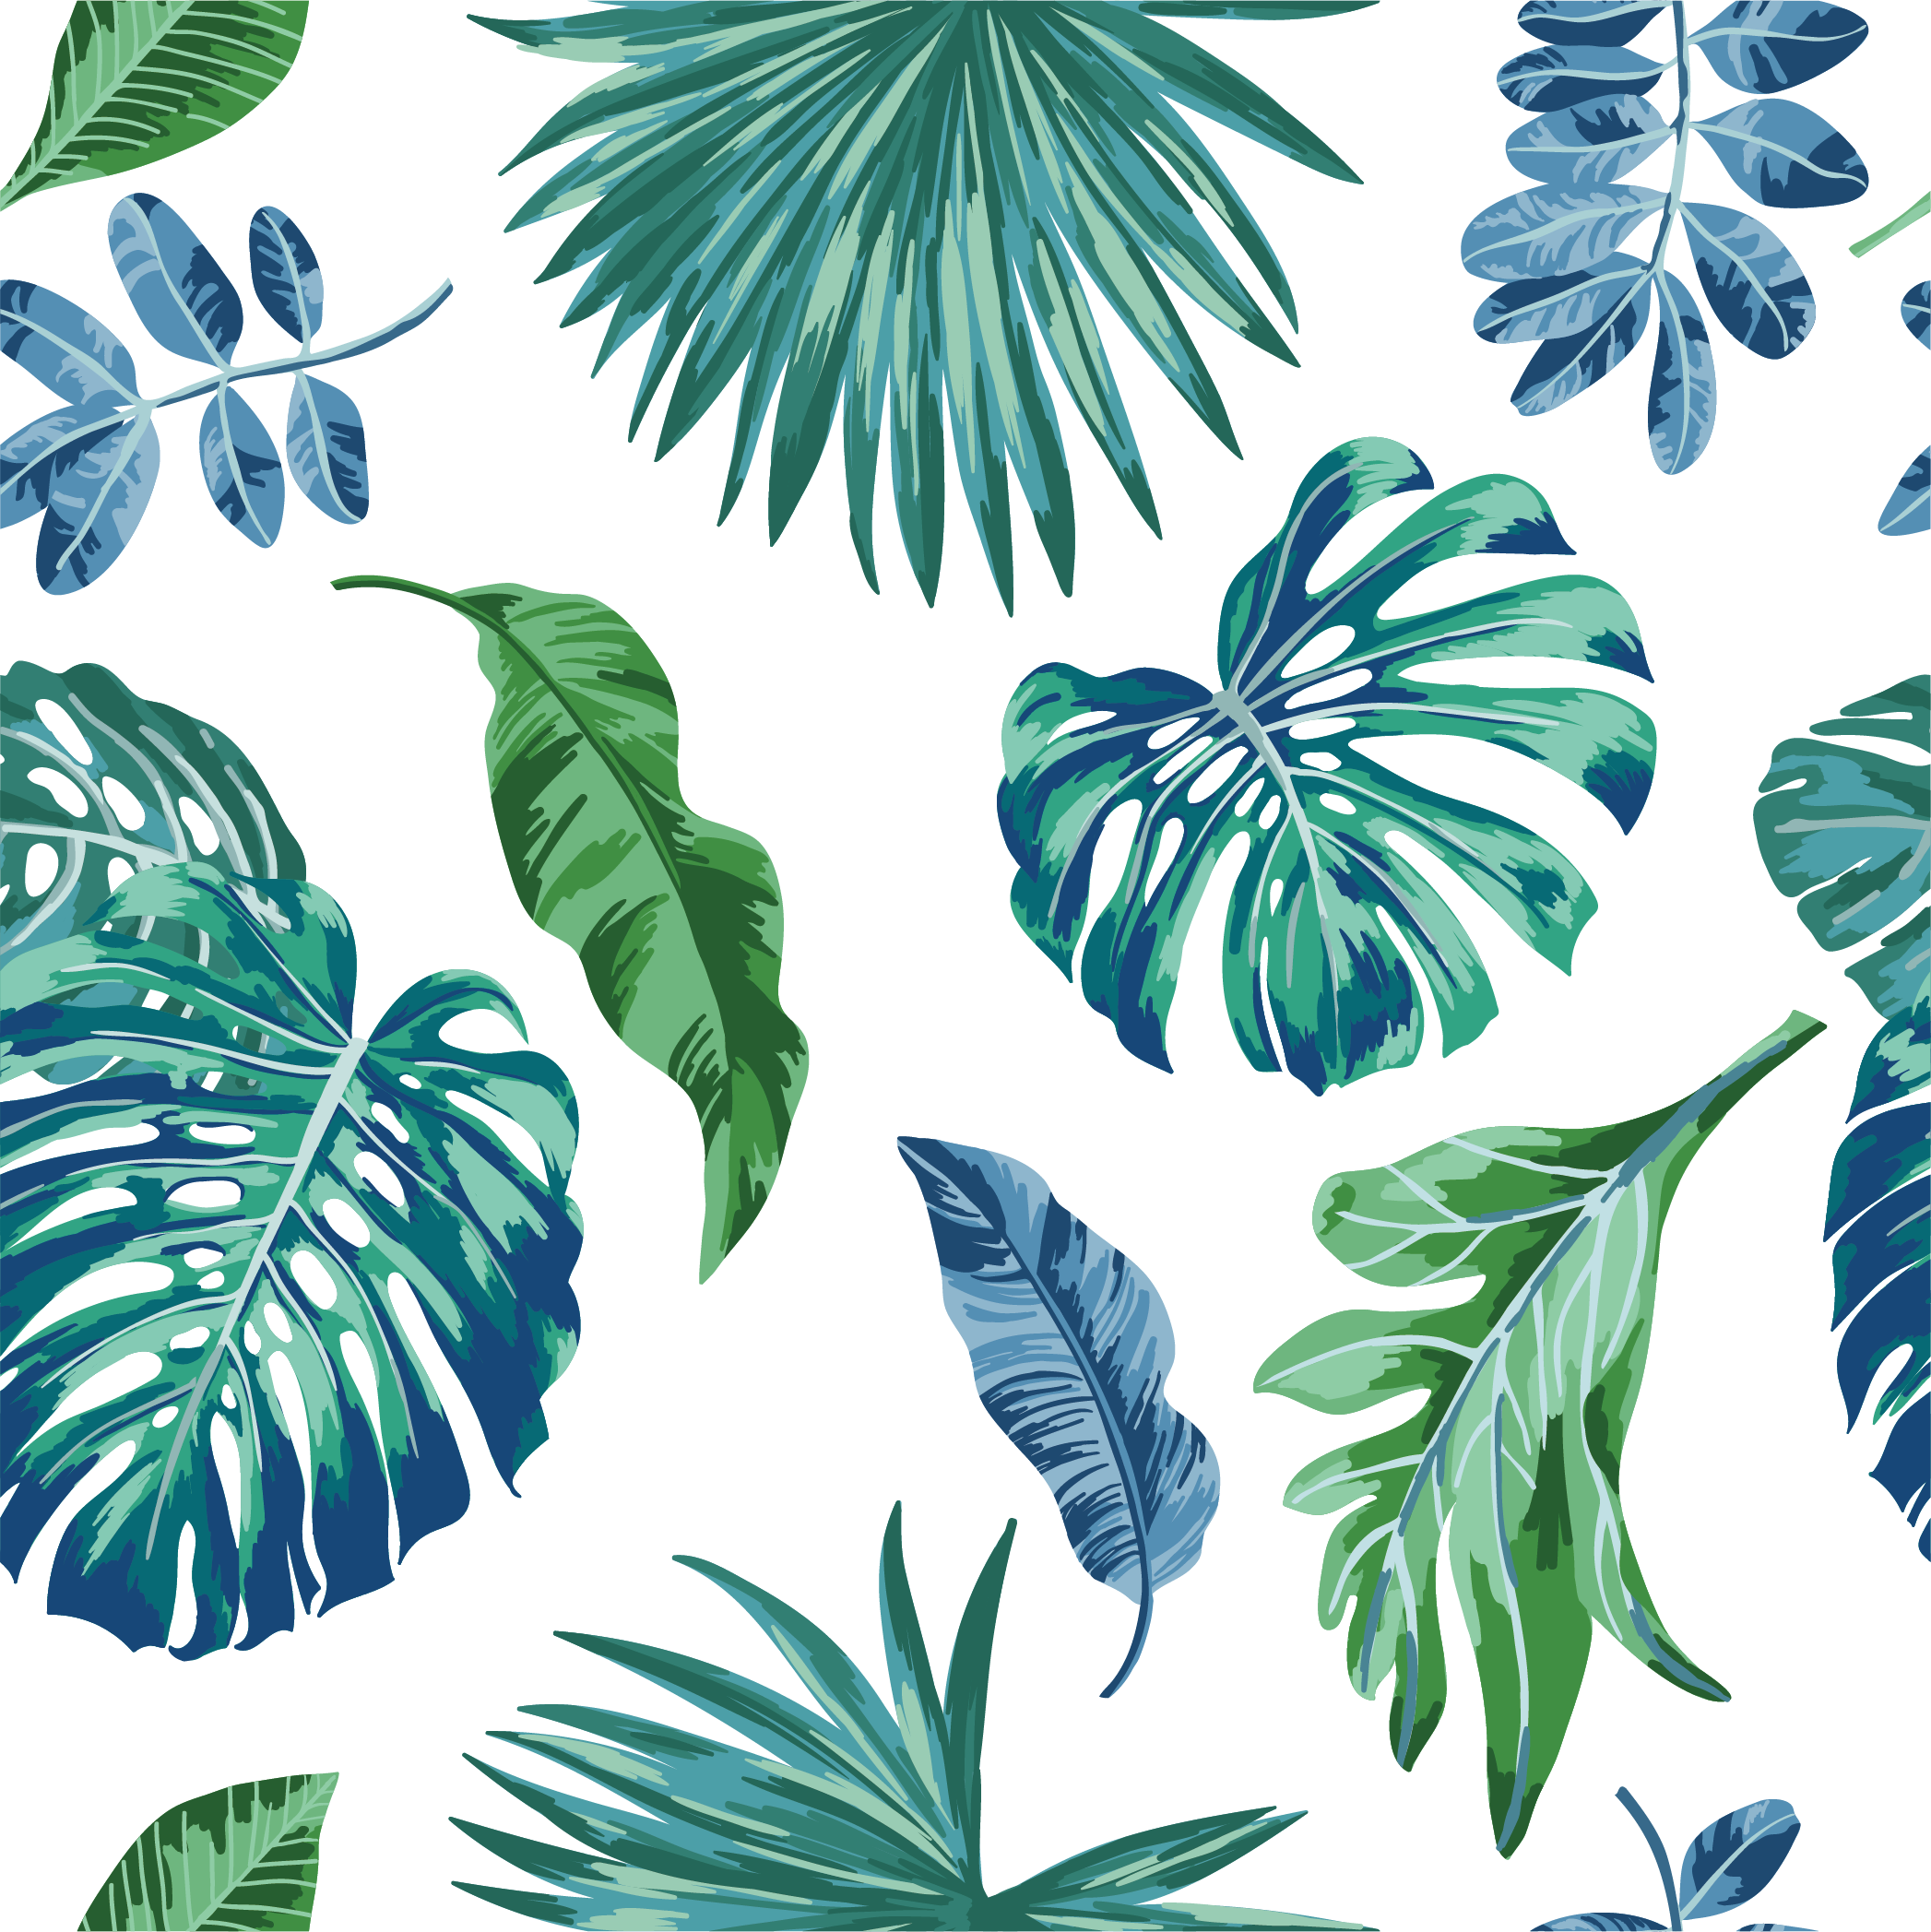 Watercolor Painting Palm Branch Tropics - Tropical Leaves Vector Illustration (2094x2095)